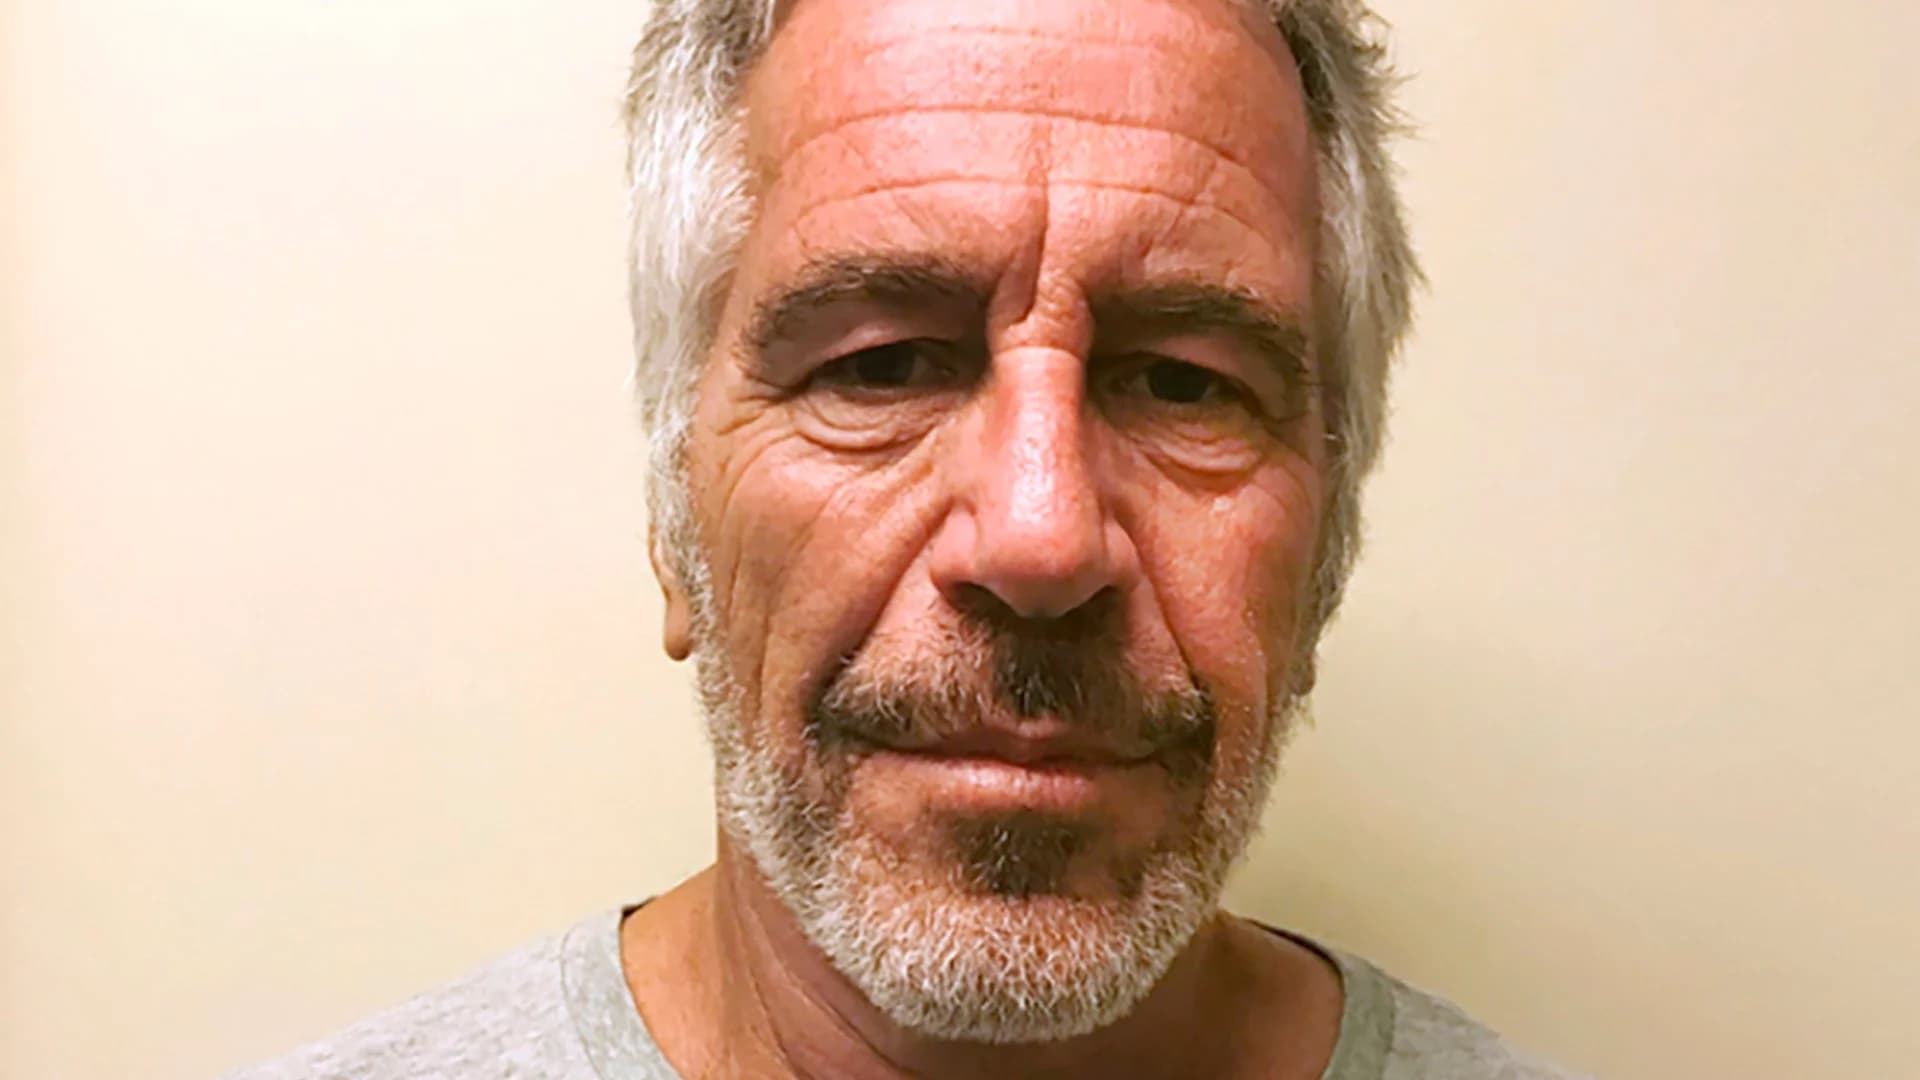 US attorney: Epstein abuse probe will continue after his death